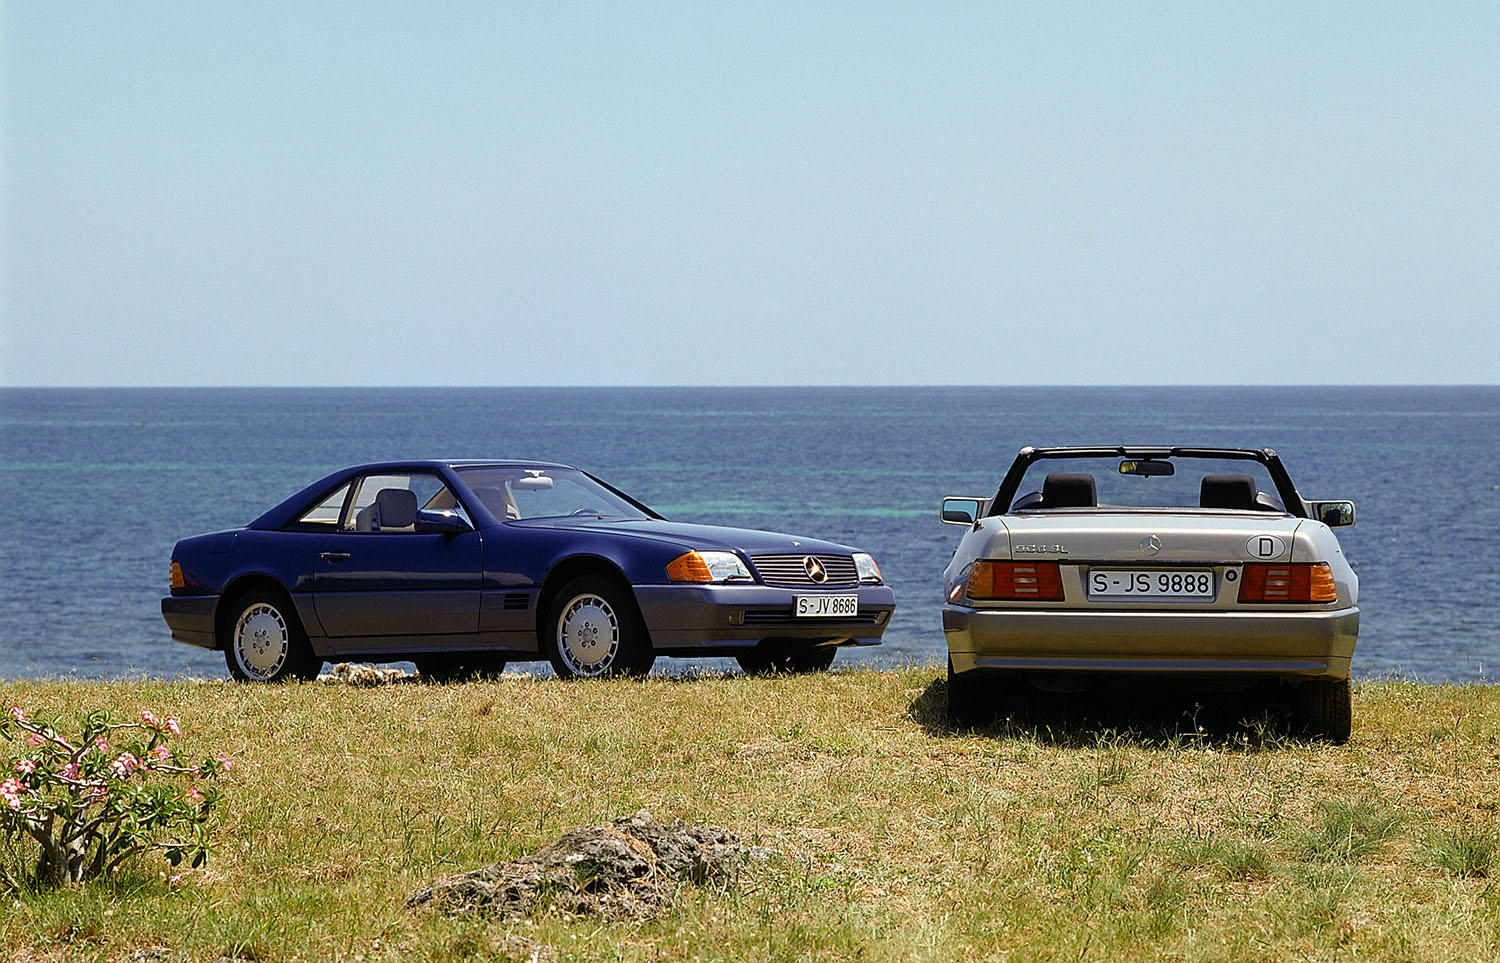 A R129 (1989 to 2001 production) Mercedes-Benz SL in blue with the hard top affixed and one in silver with the soft top stowed, both parked near the sea.